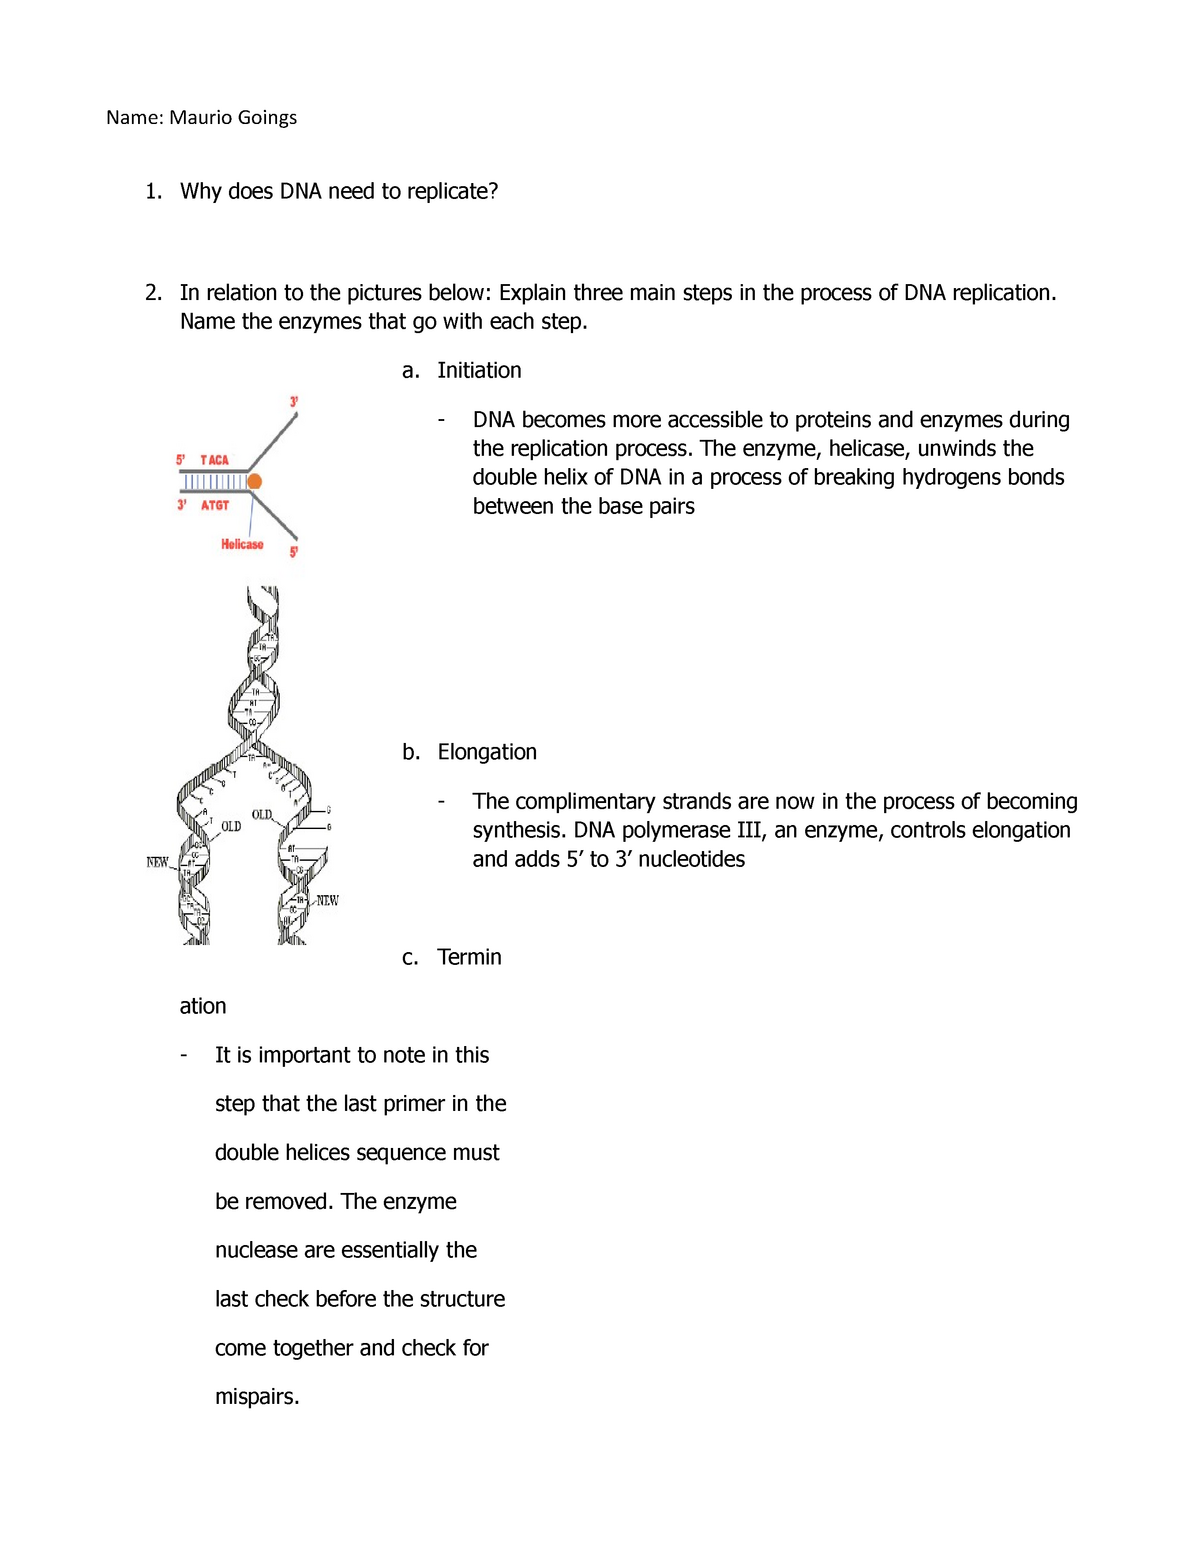 dna-replication-worksheet-1-name-maurio-goings-why-does-dna-need-to